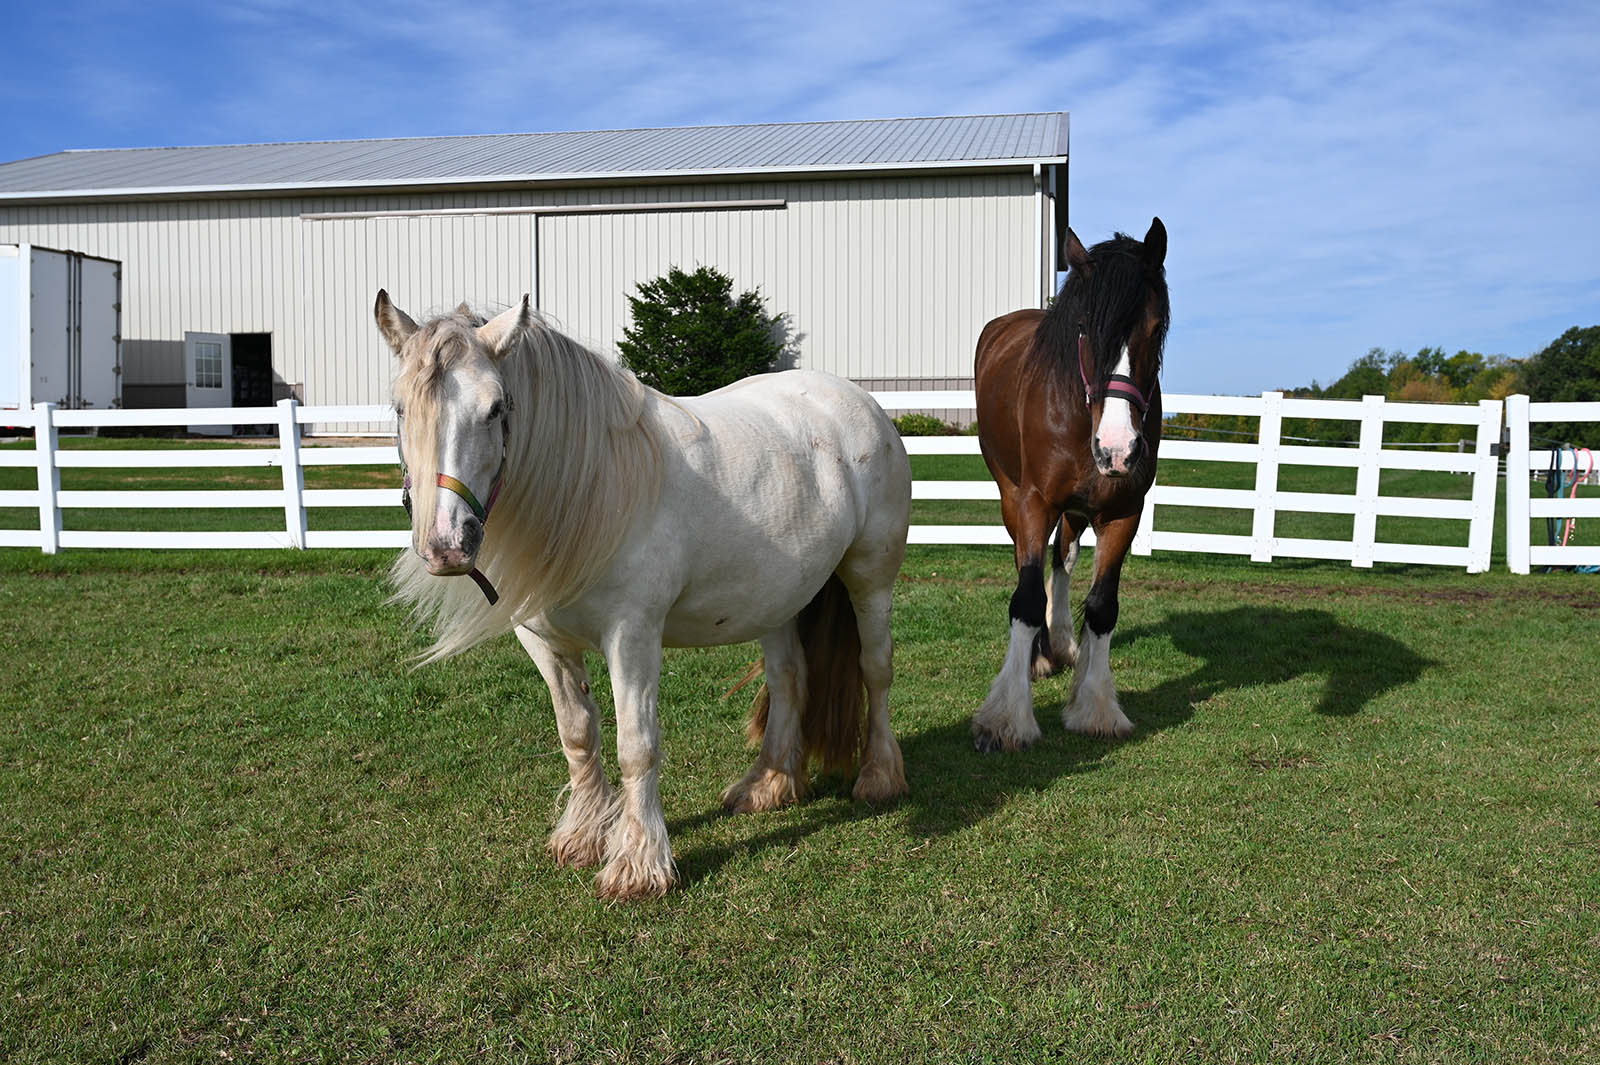 White horse with brown and white horse in green pasture with 19 stall horse barn in the background